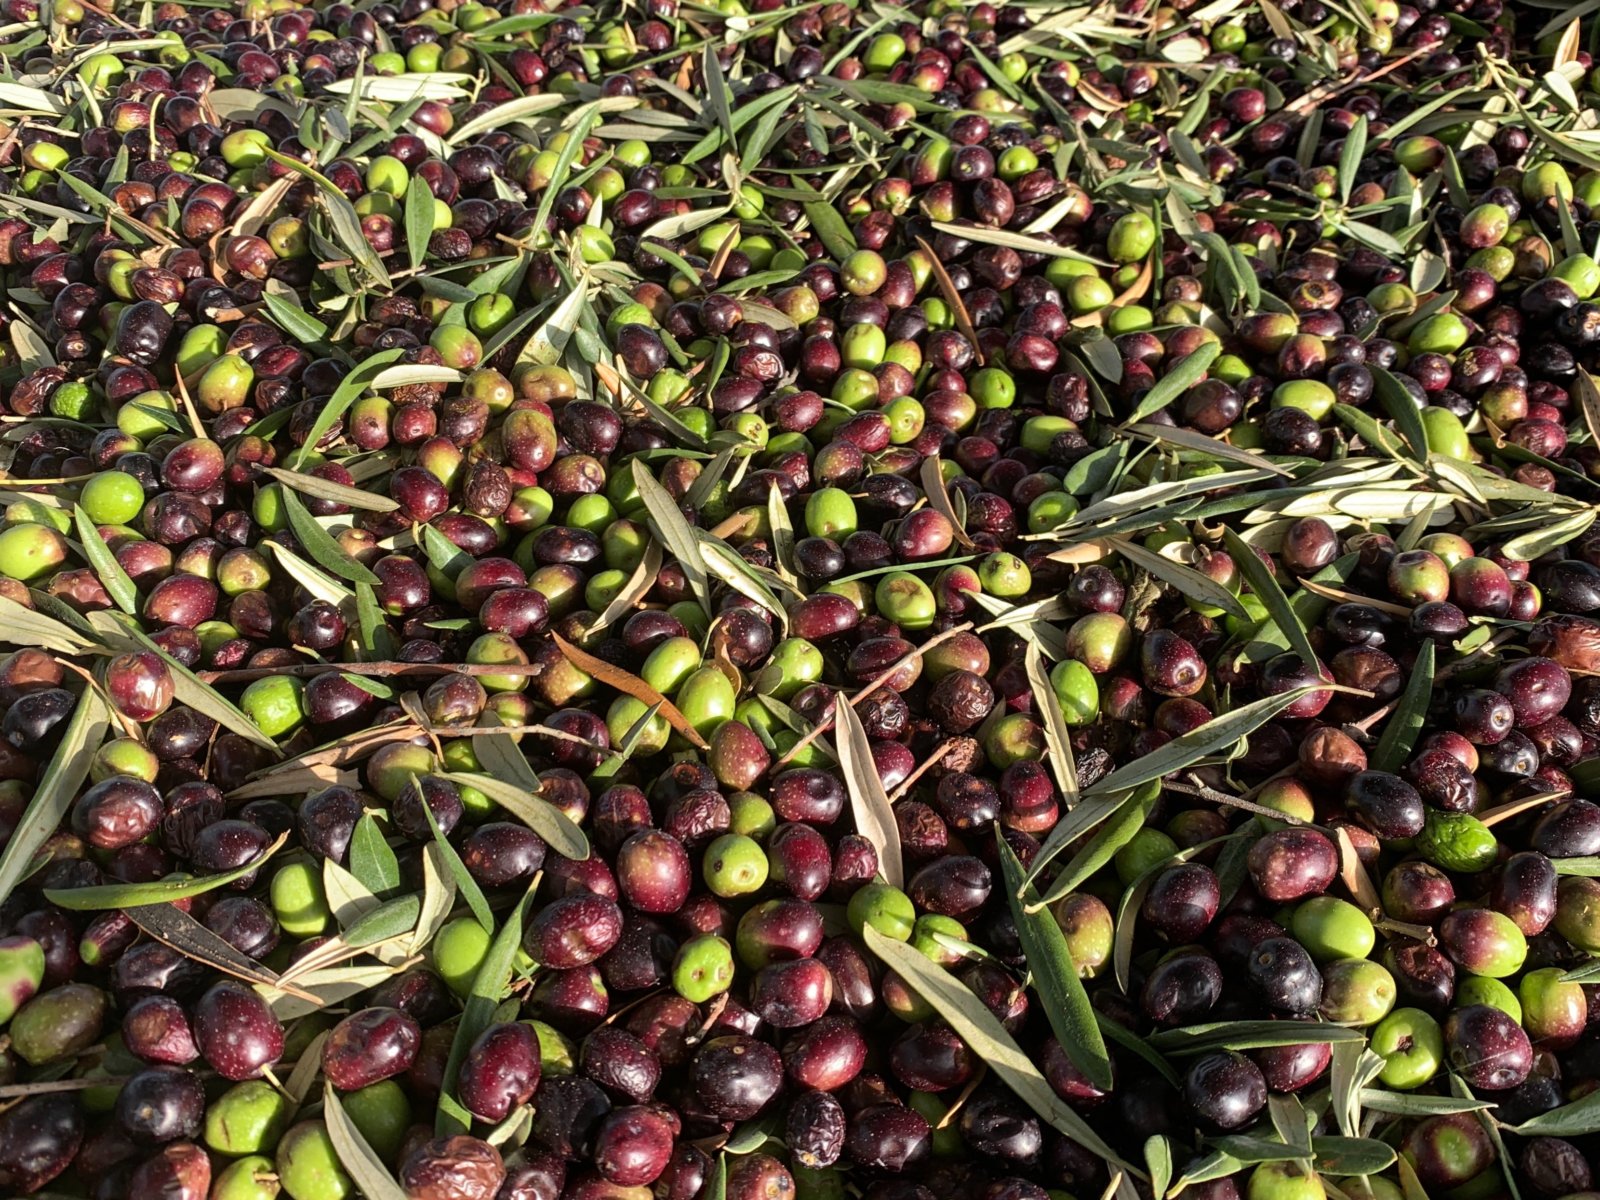 Olives waiting to be turned into olive oil at the Molisur factory, Spain. Photo by John Cameron